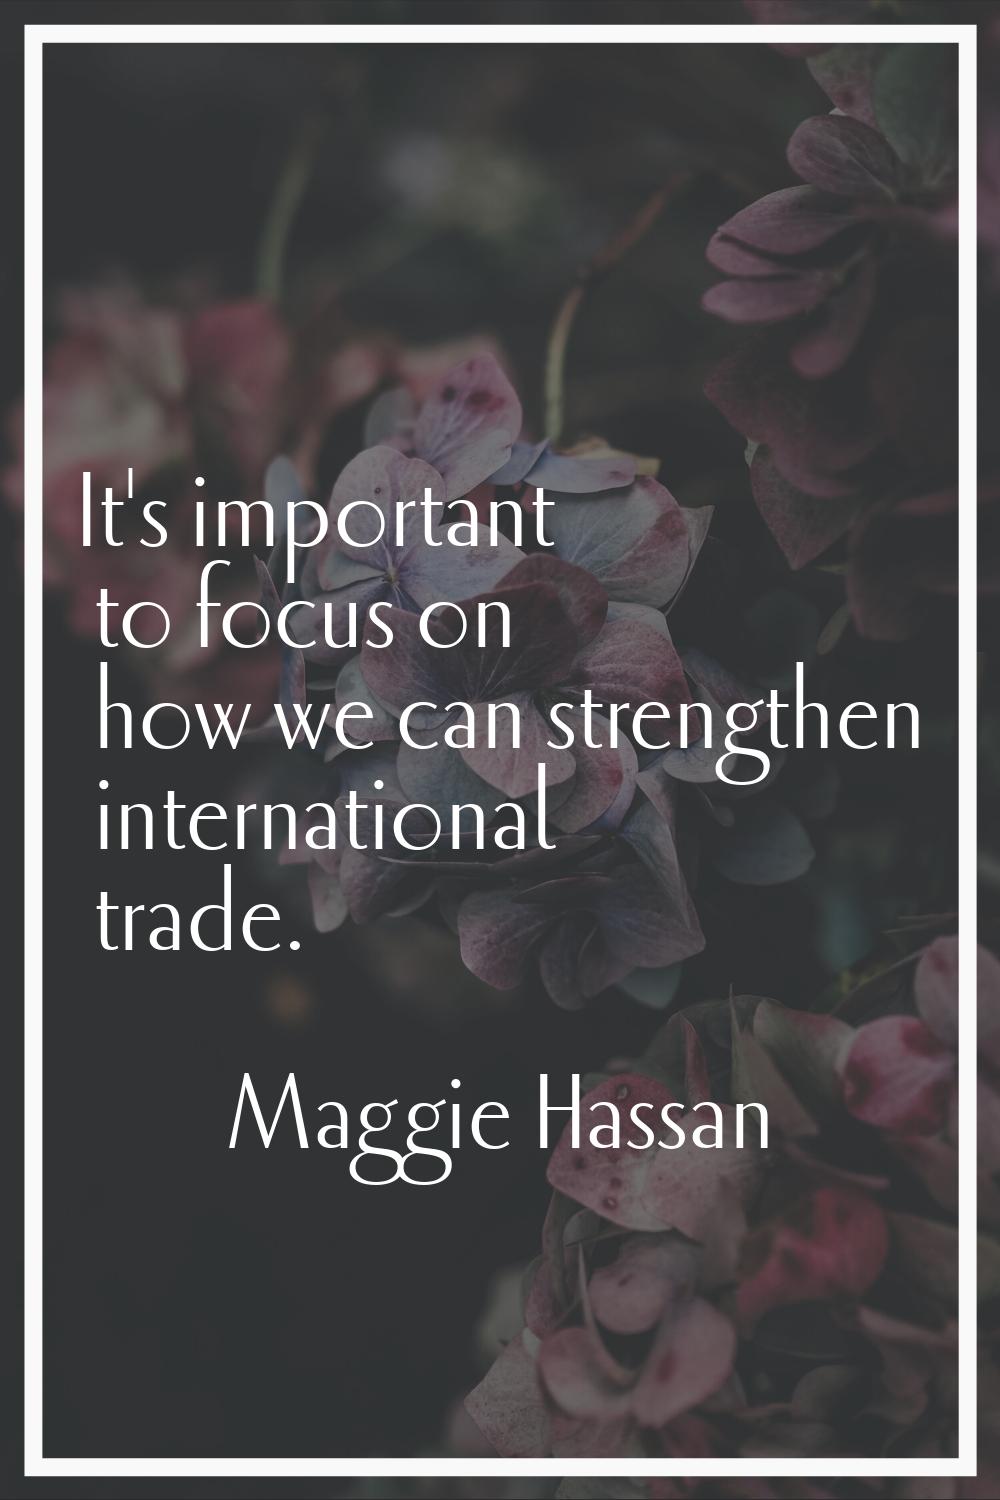 It's important to focus on how we can strengthen international trade.